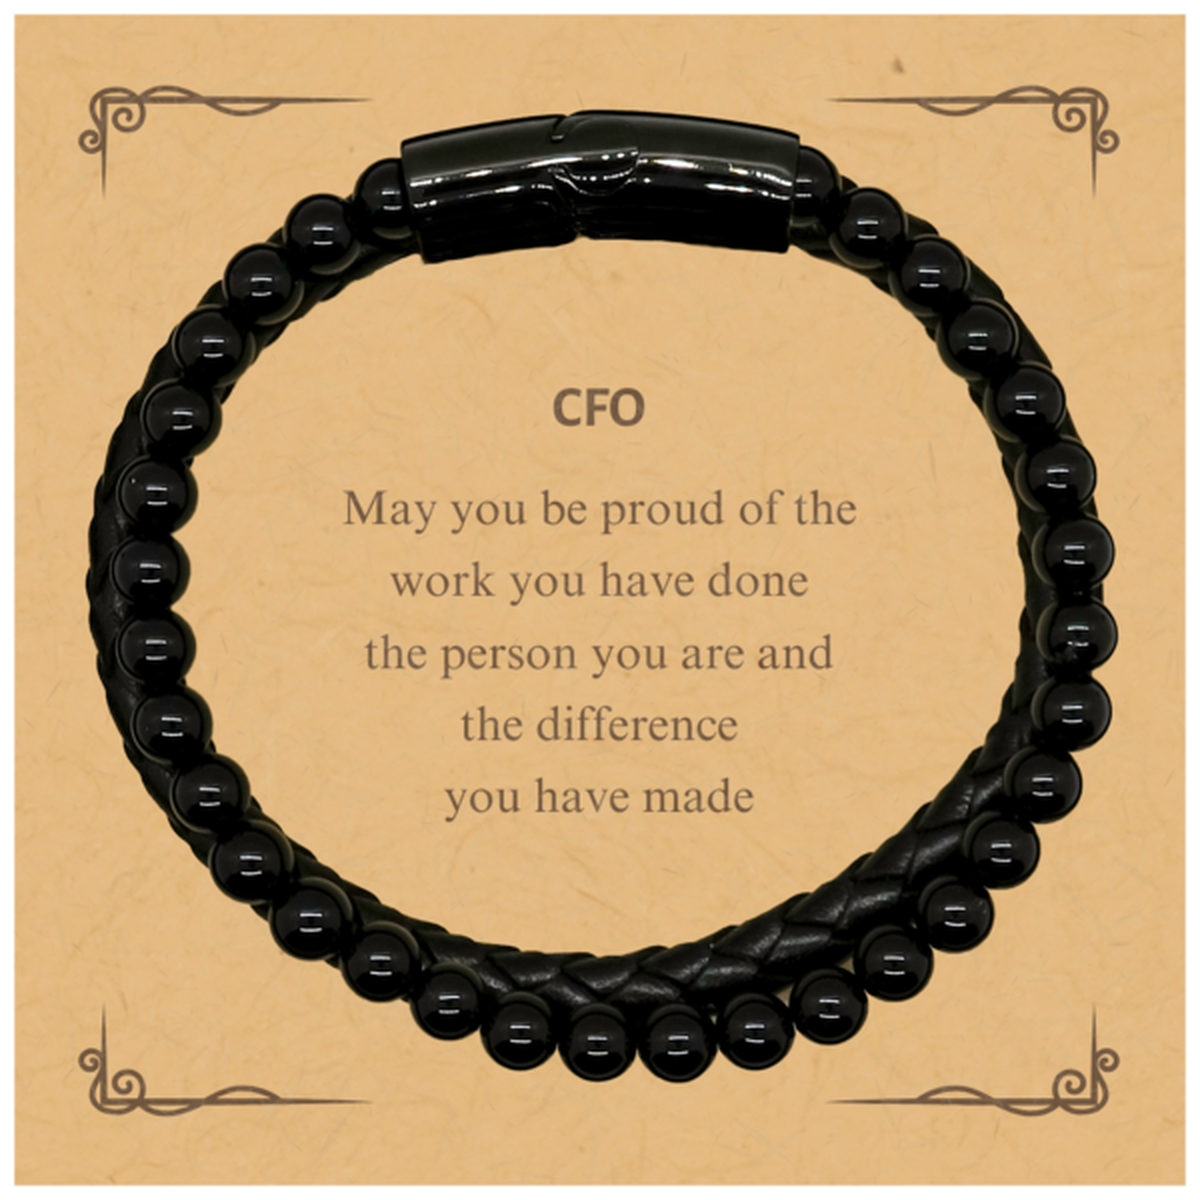 CFO May you be proud of the work you have done, Retirement CFO Stone Leather Bracelets for Colleague Appreciation Gifts Amazing for CFO